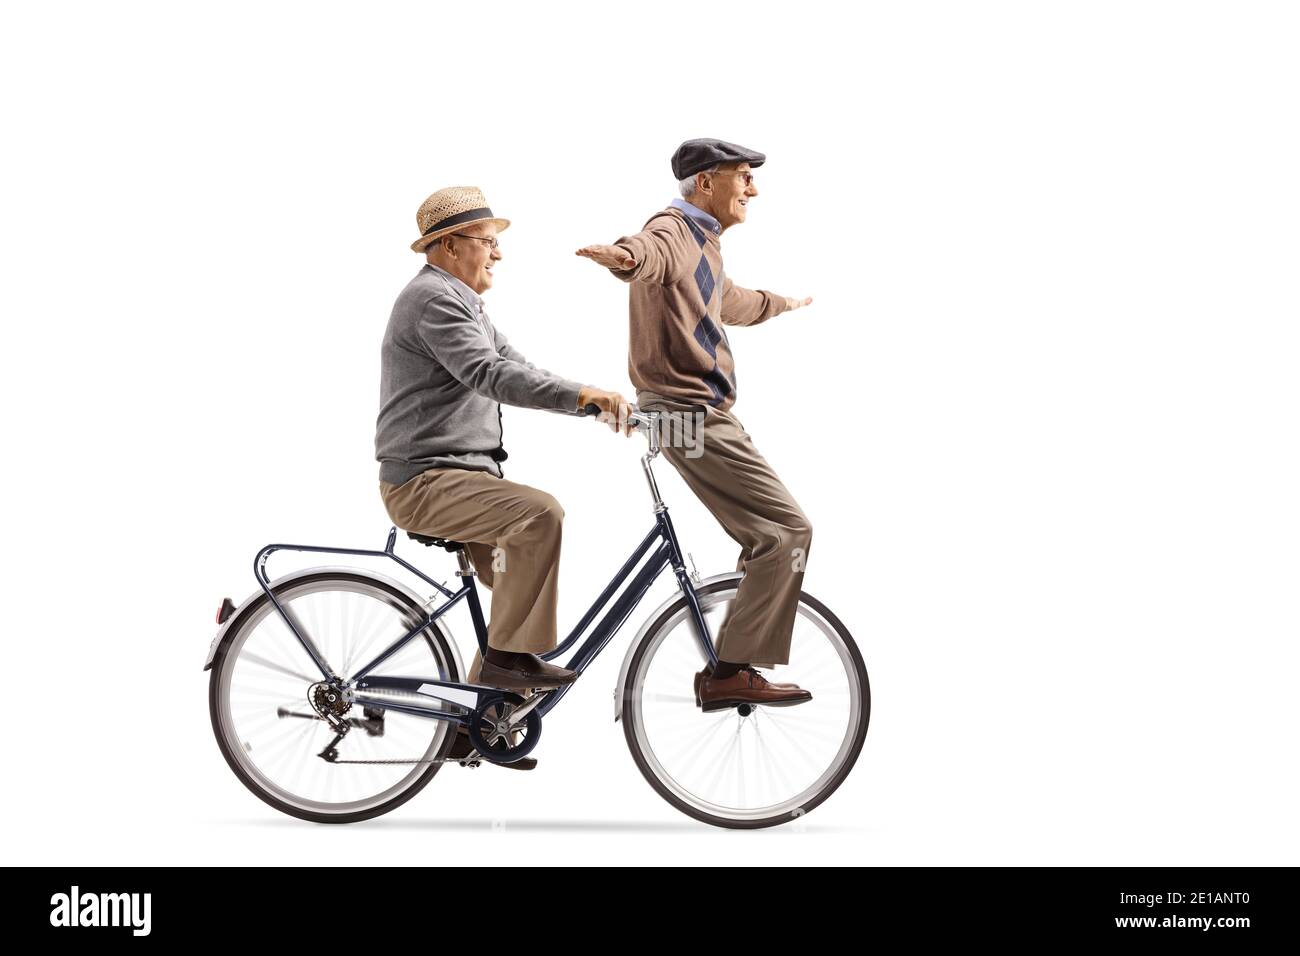 Funny elderly men riding a bicycle isolated on white background Stock Photo